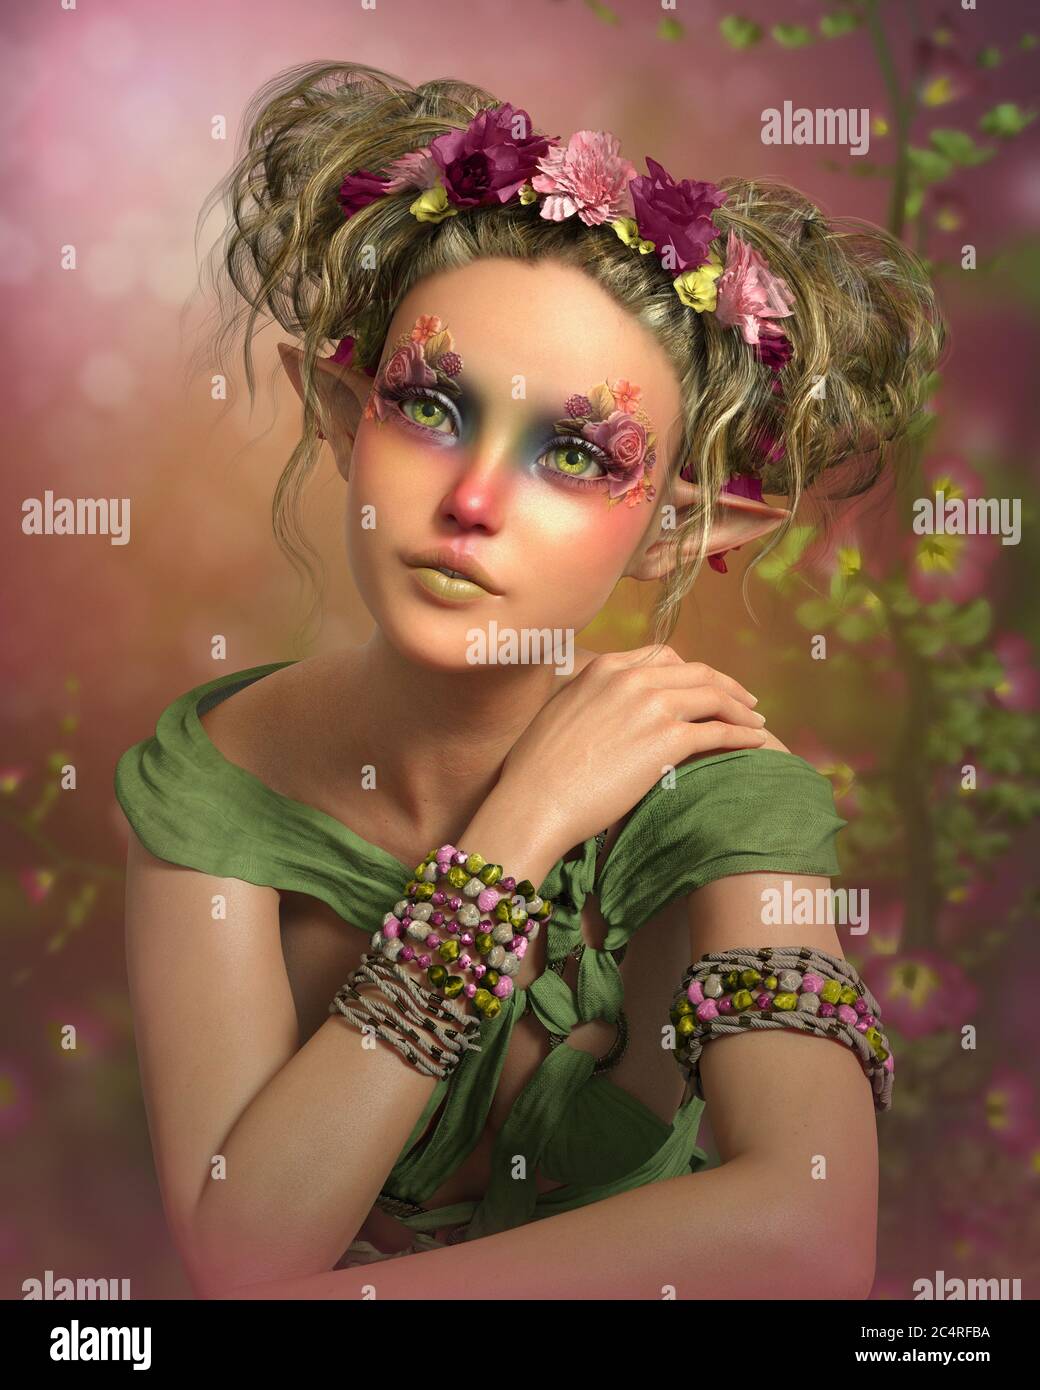 3d computer graphics of a cute fairy with a red nose Stock Photo